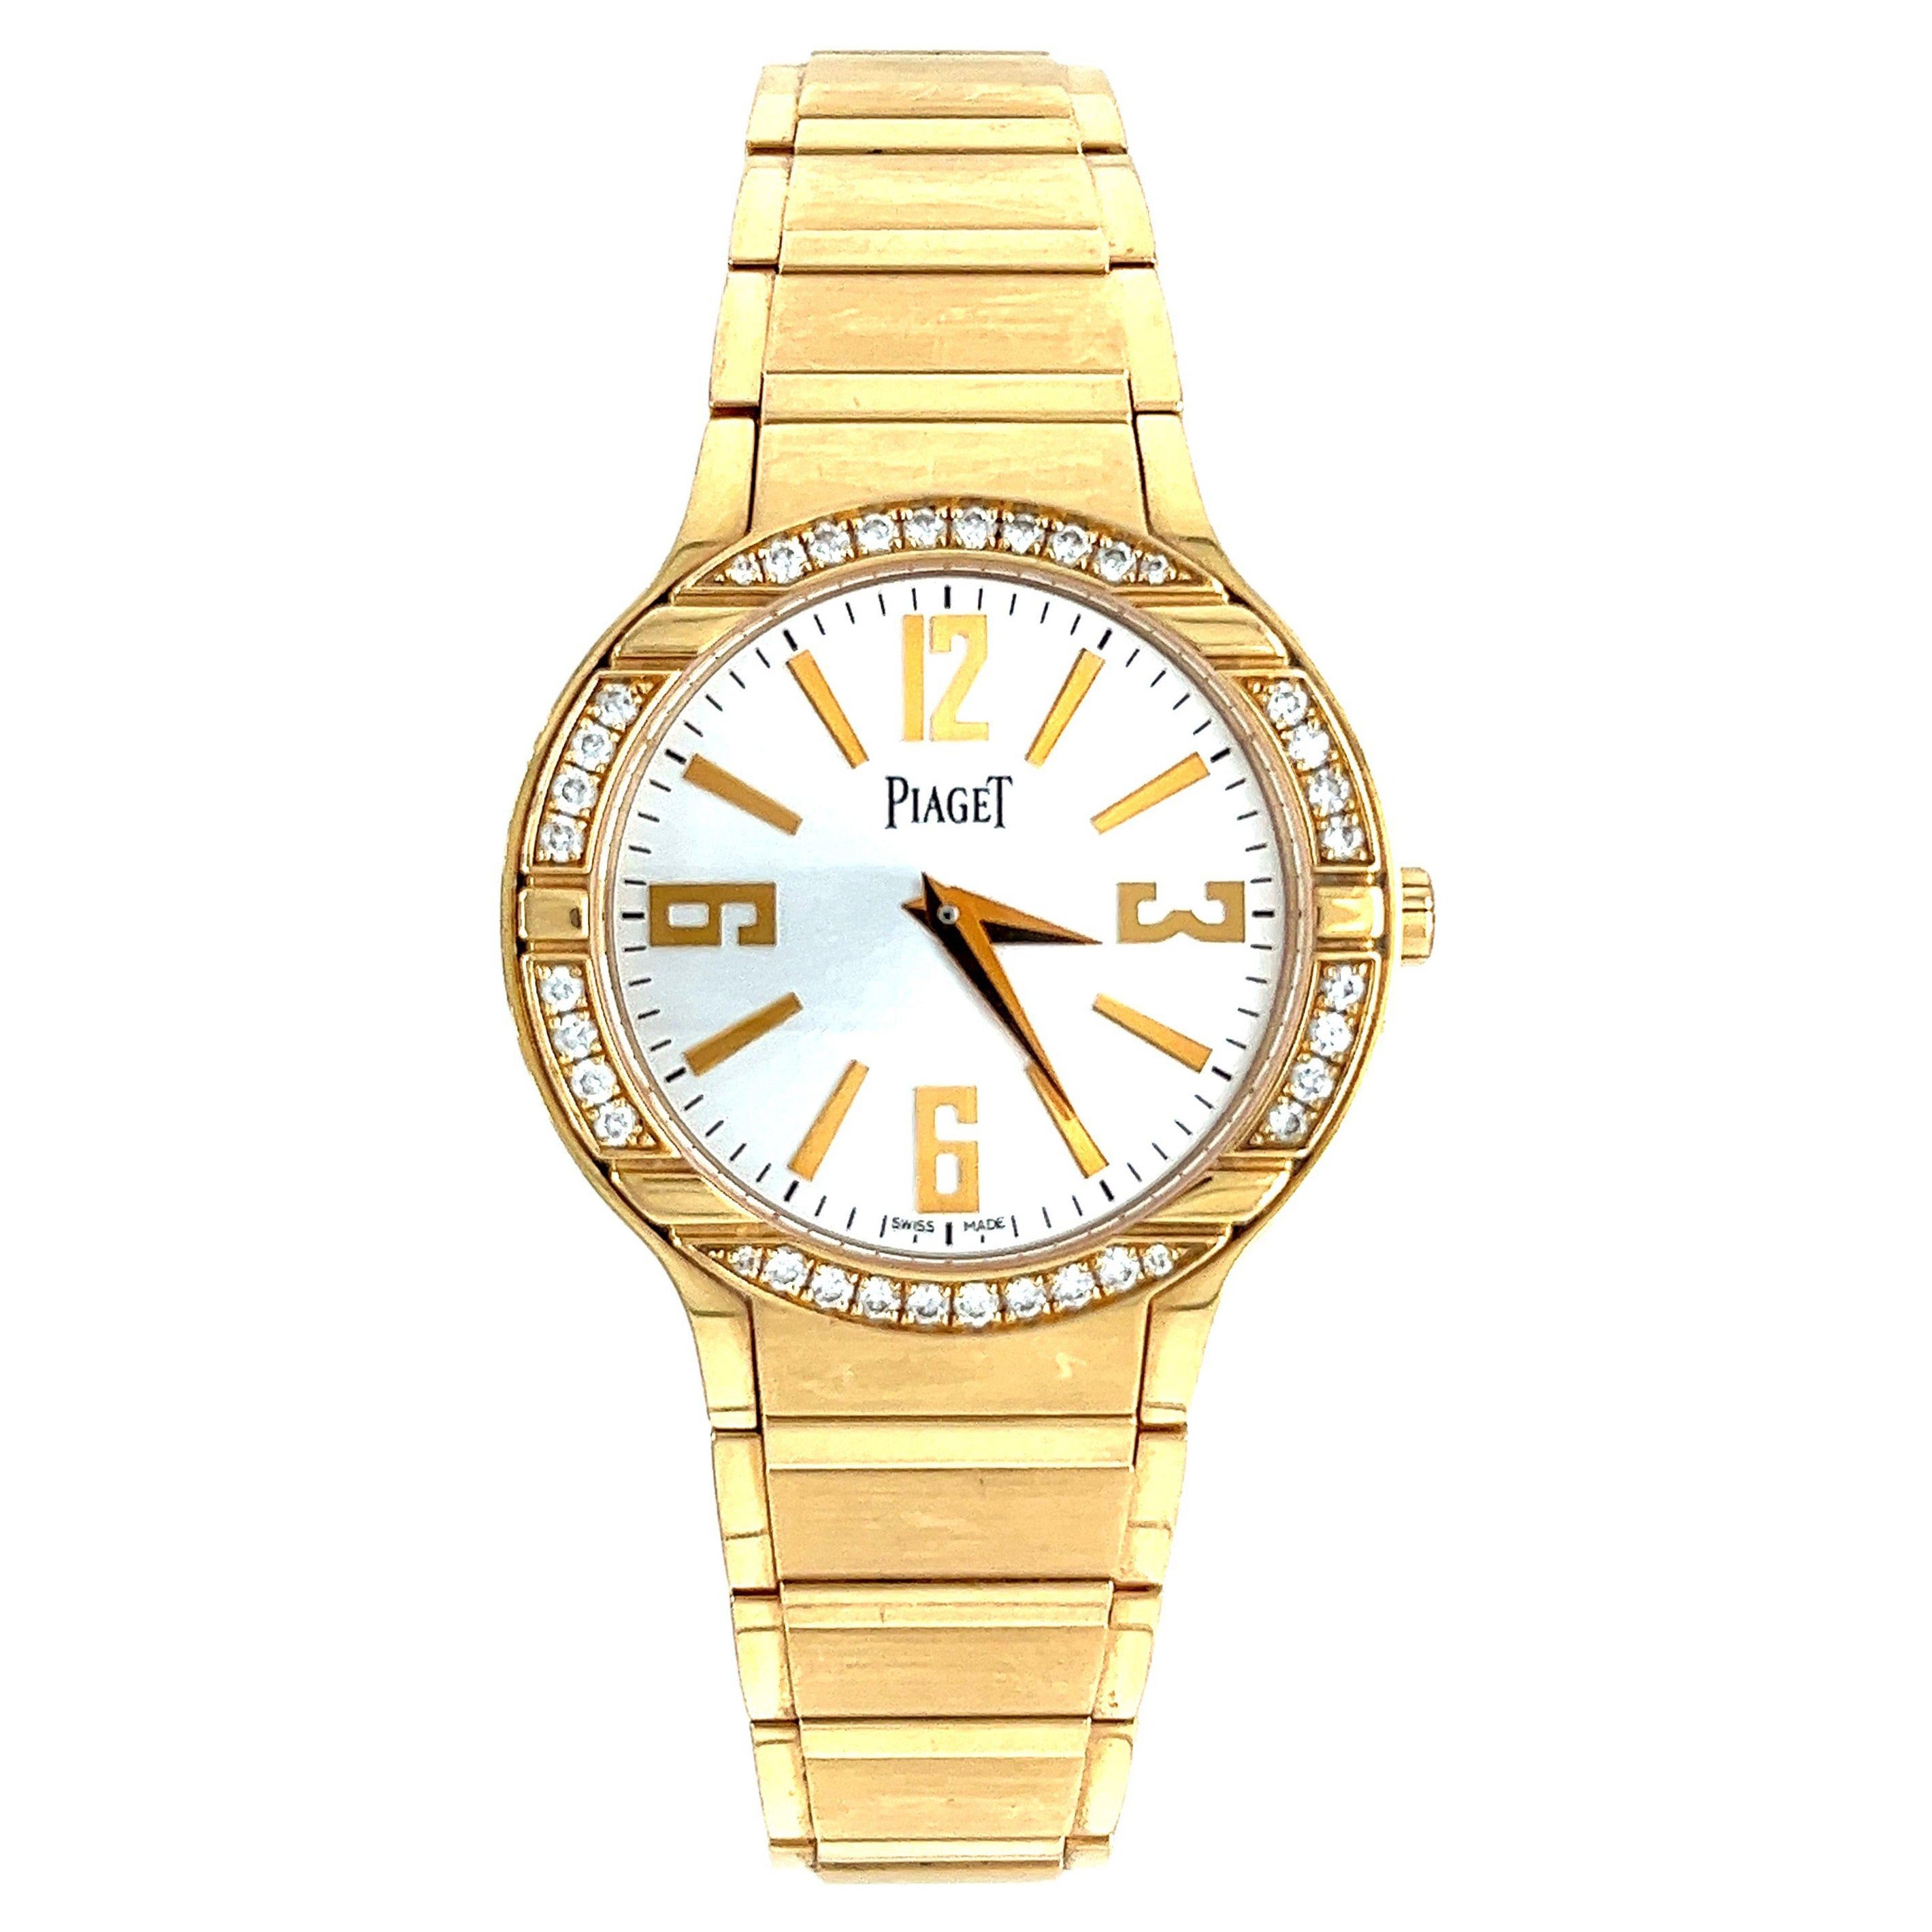 Piaget 'Polo' Ladies in 18k Yellow Gold with Diamond Bezel & Piaget Papers For Sale